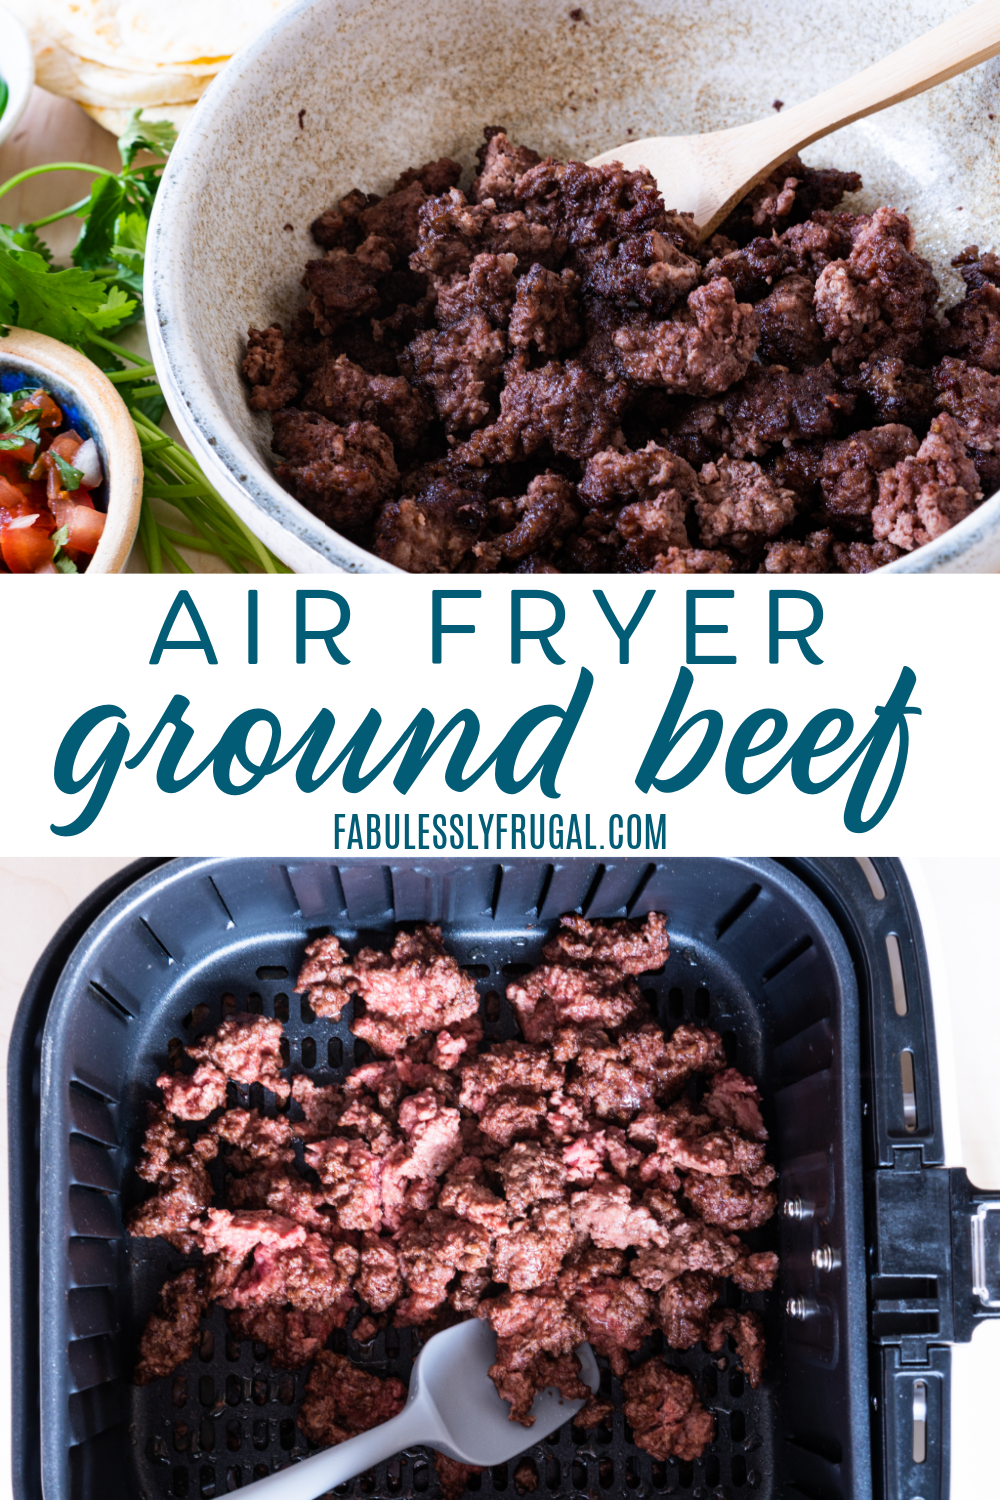 Air fryer beef is simple, quick, and so much healthier! Cleaning up and cooking meat in the air fryer is so much better than the stove top! 